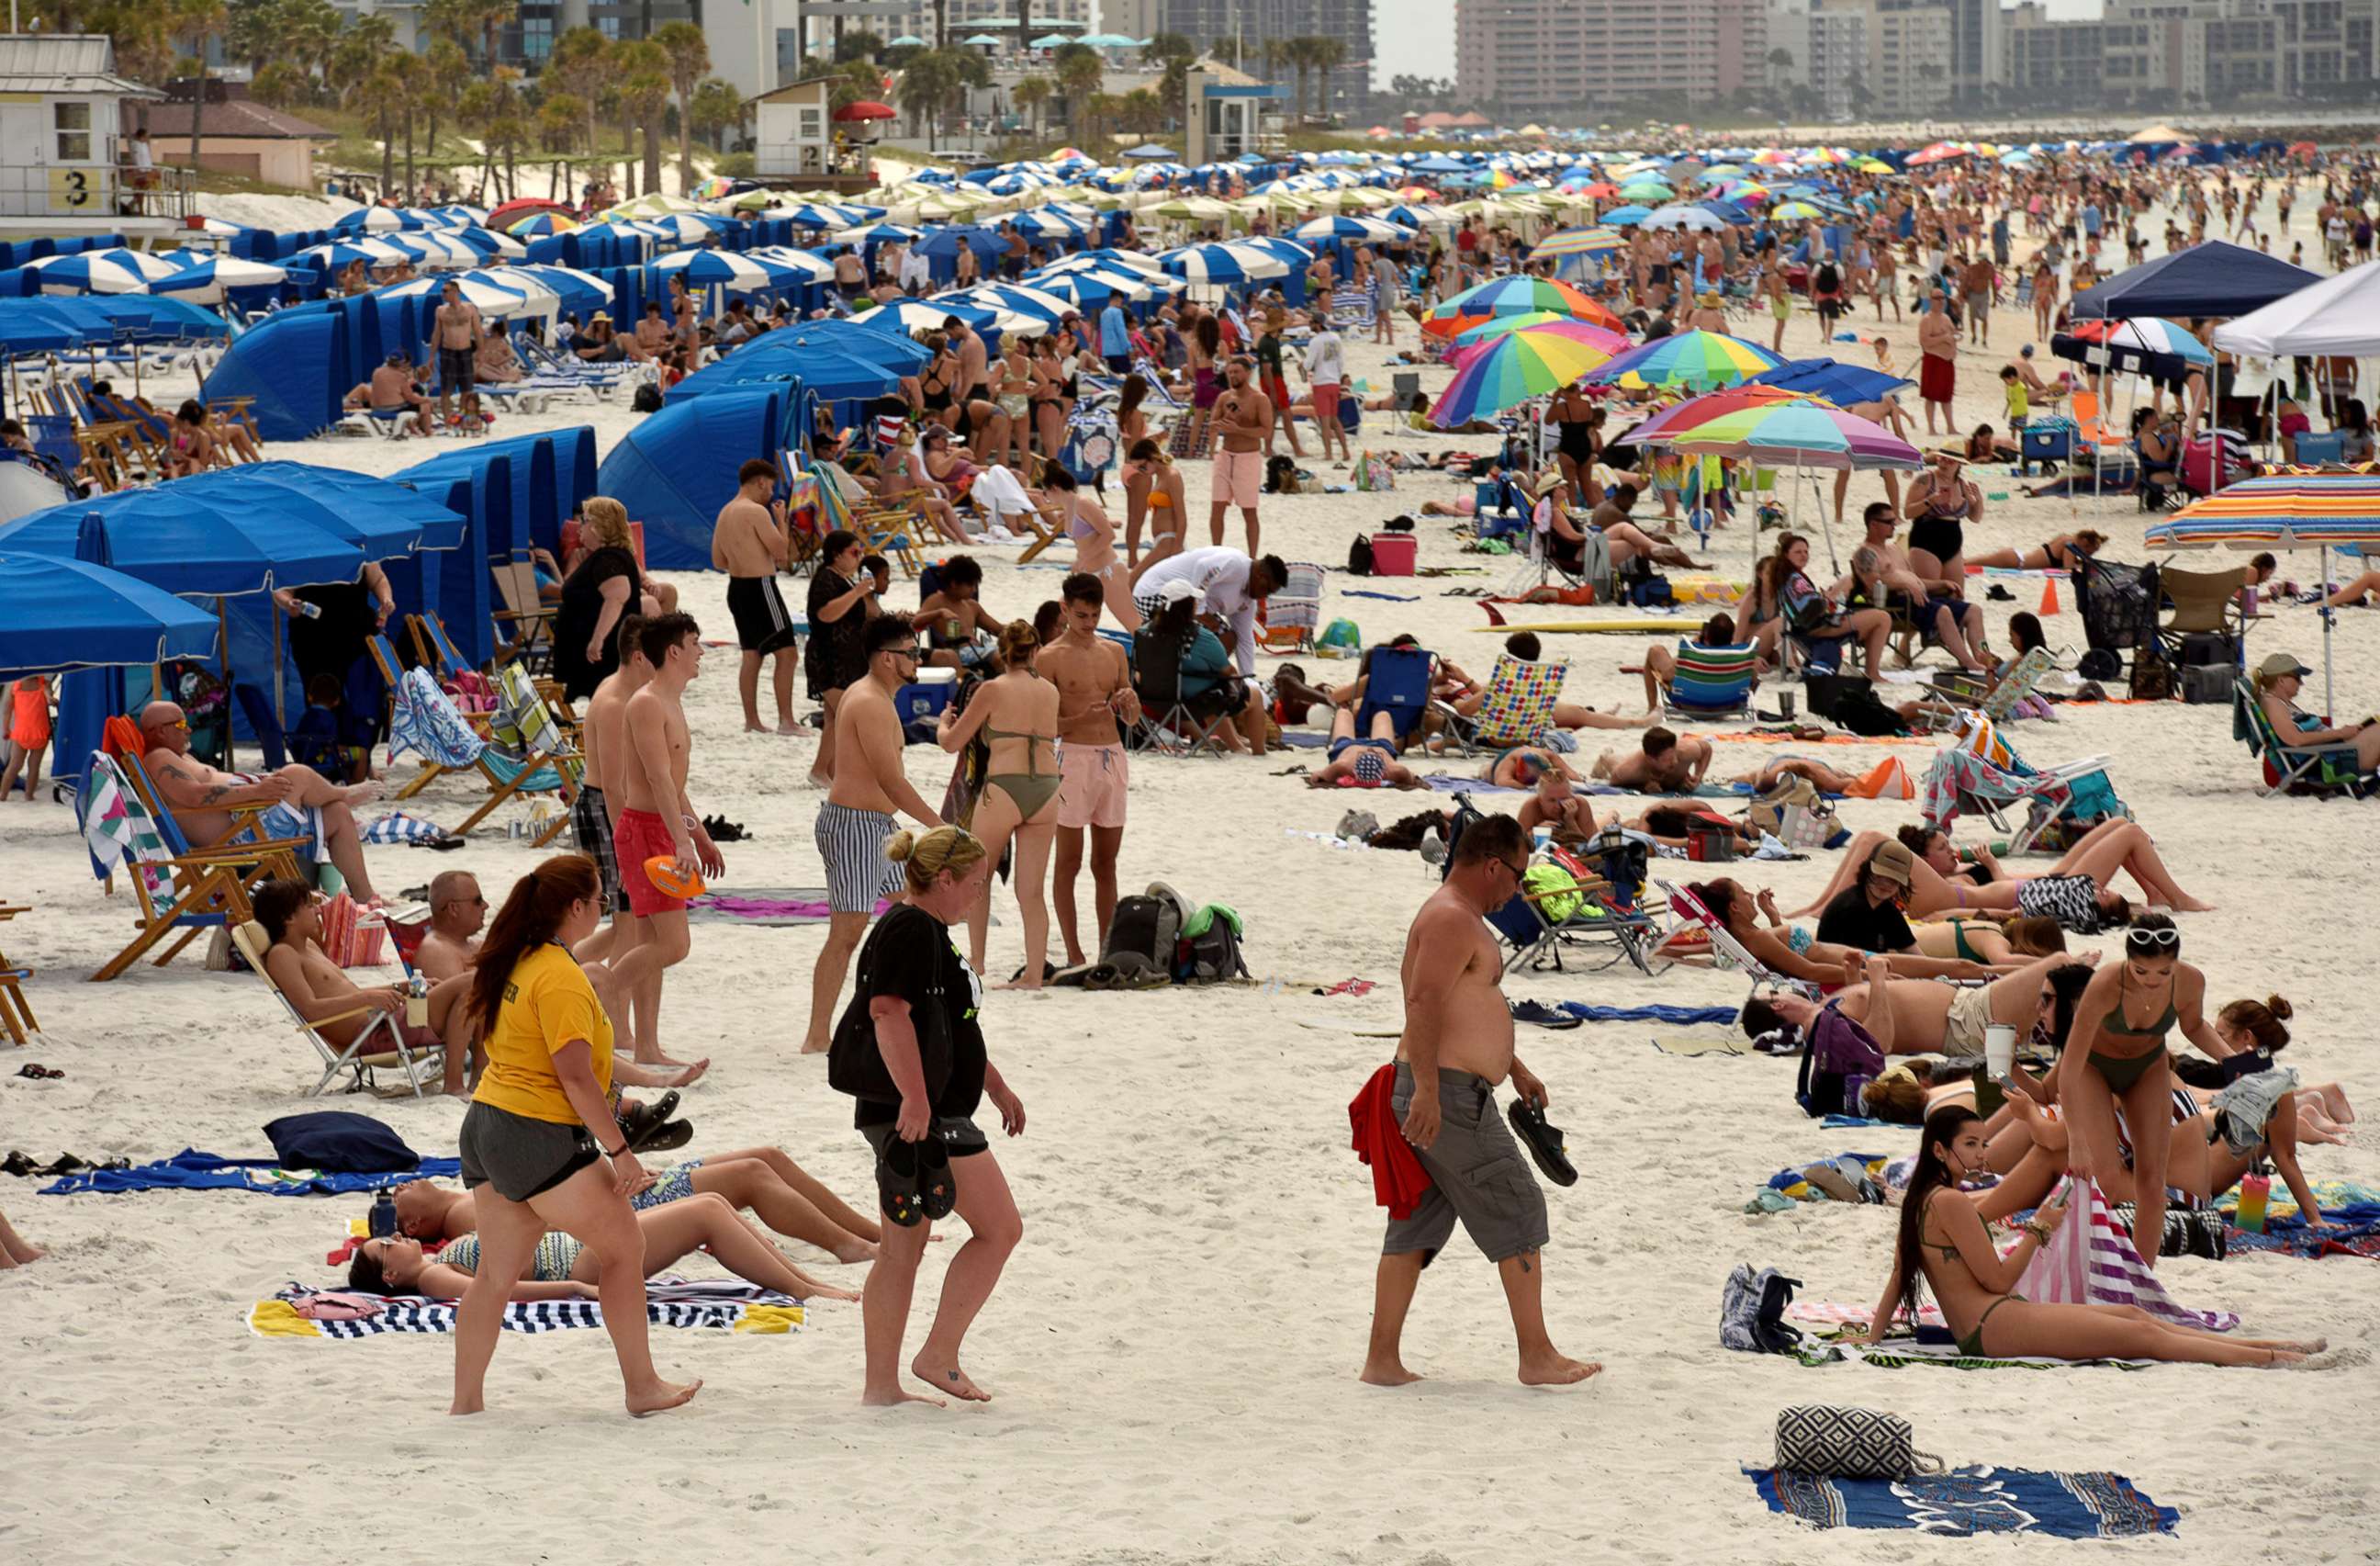 PHOTO: In this March 17, 2020, file photo, people crowd the beach in Clearwater, Fla.